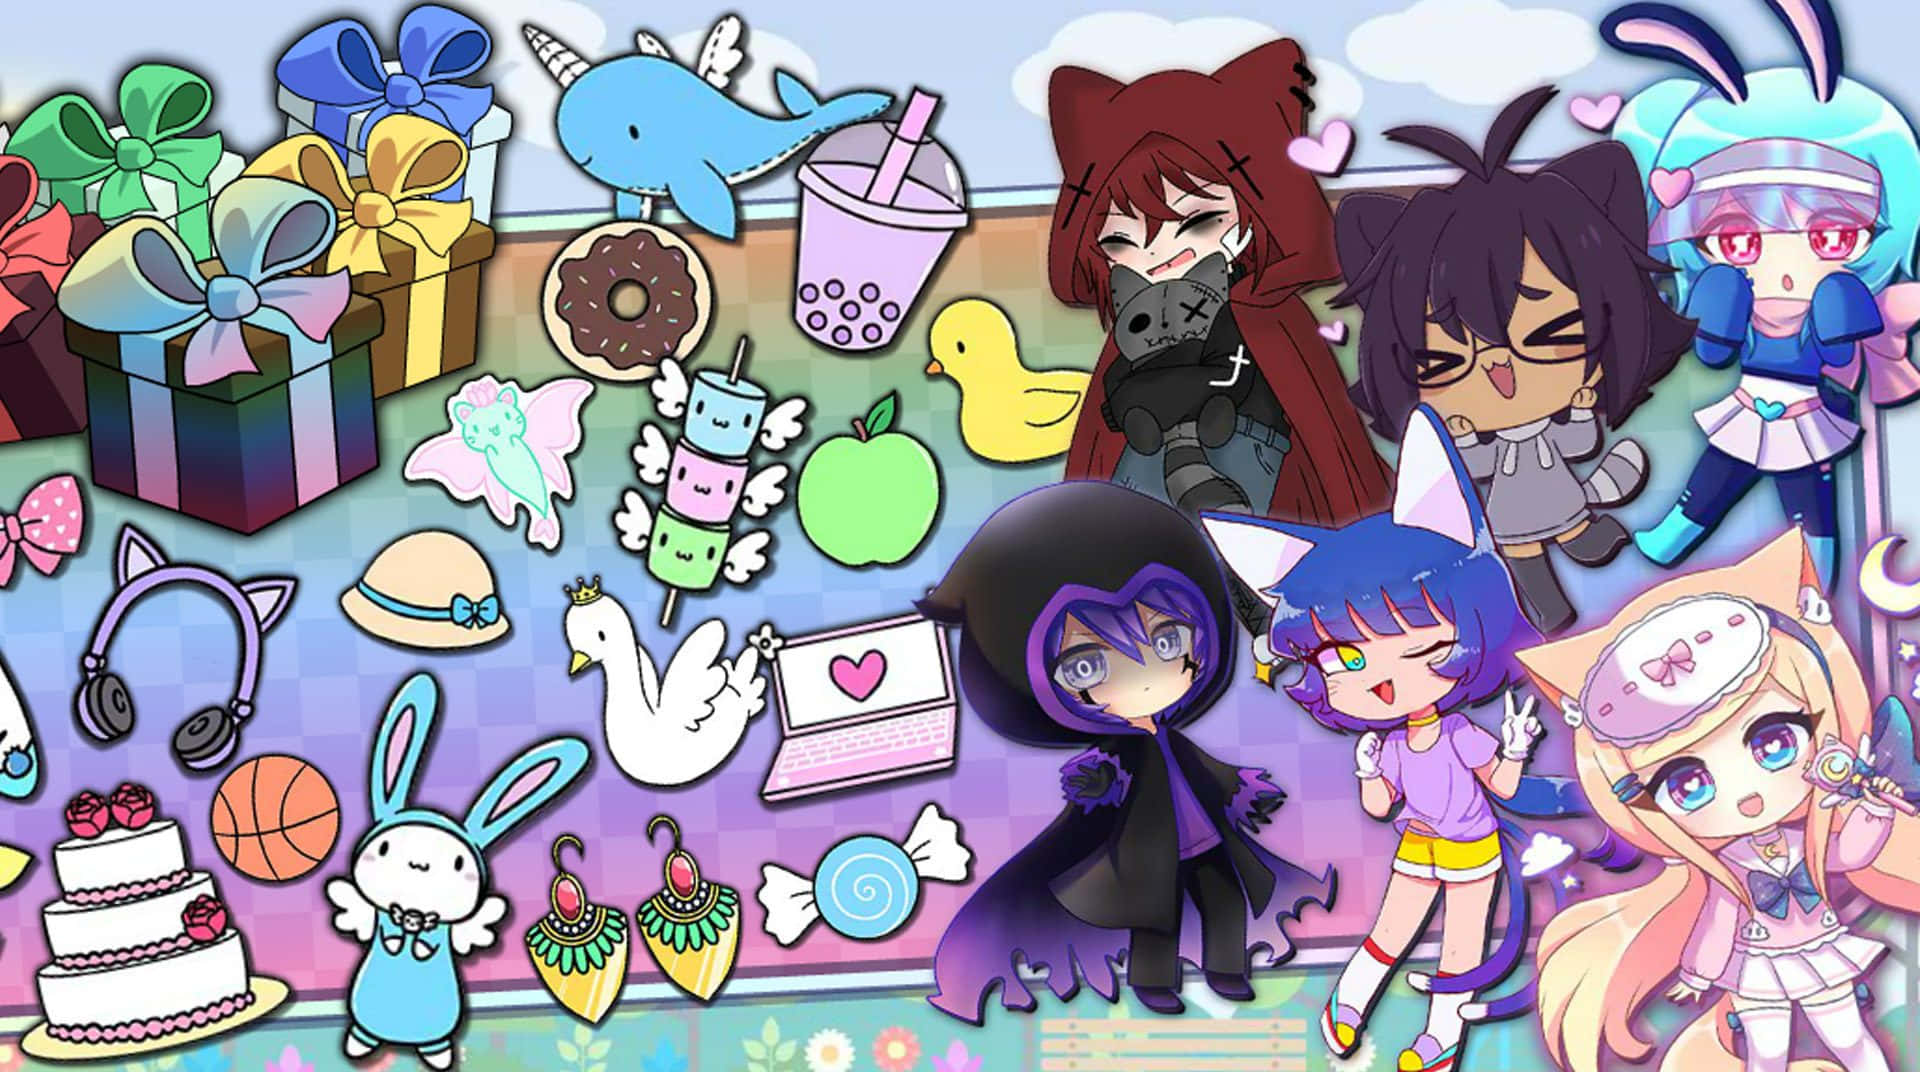 Gacha Life's cute characters provide hours of entertainment! Wallpaper